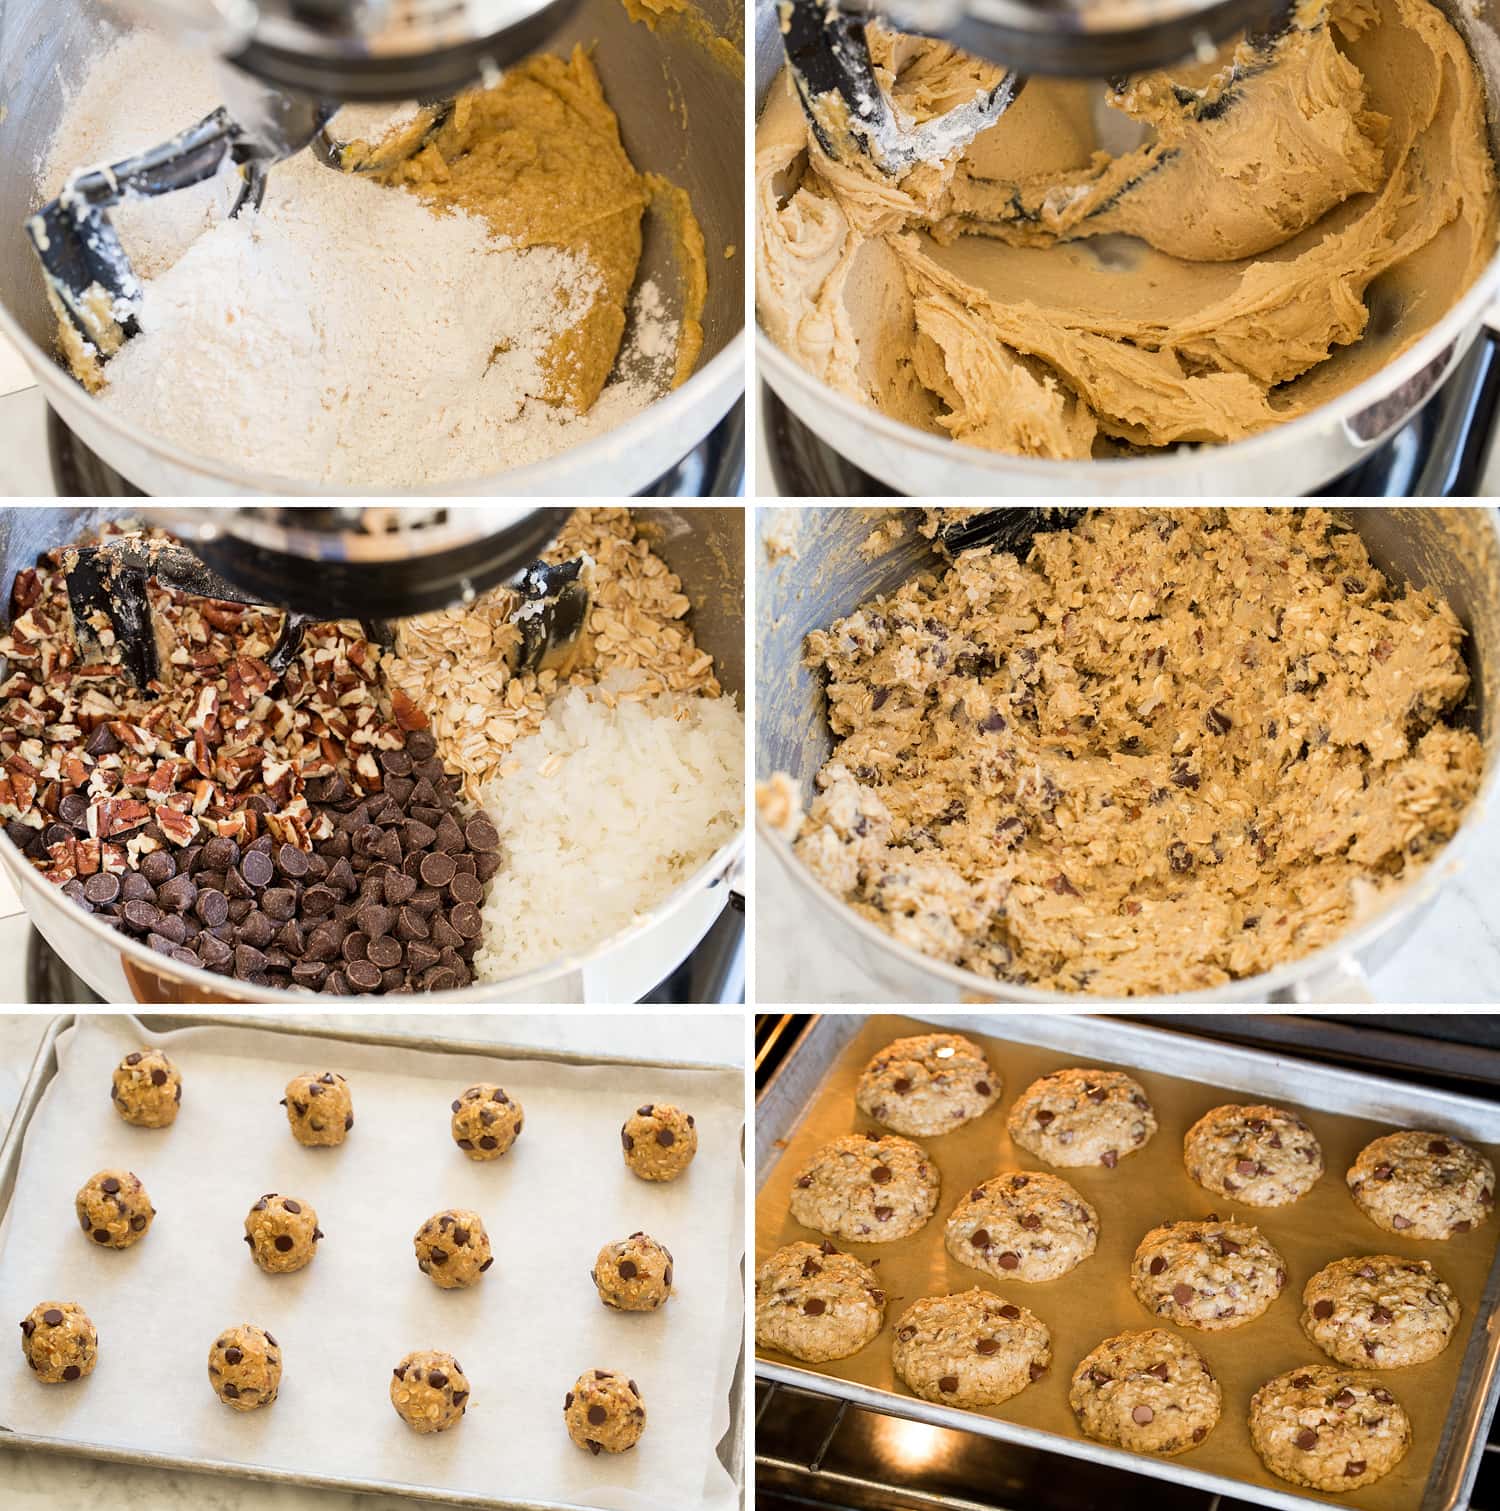 Continued steps of making cowboy cookie dough and baking on cookie sheet.